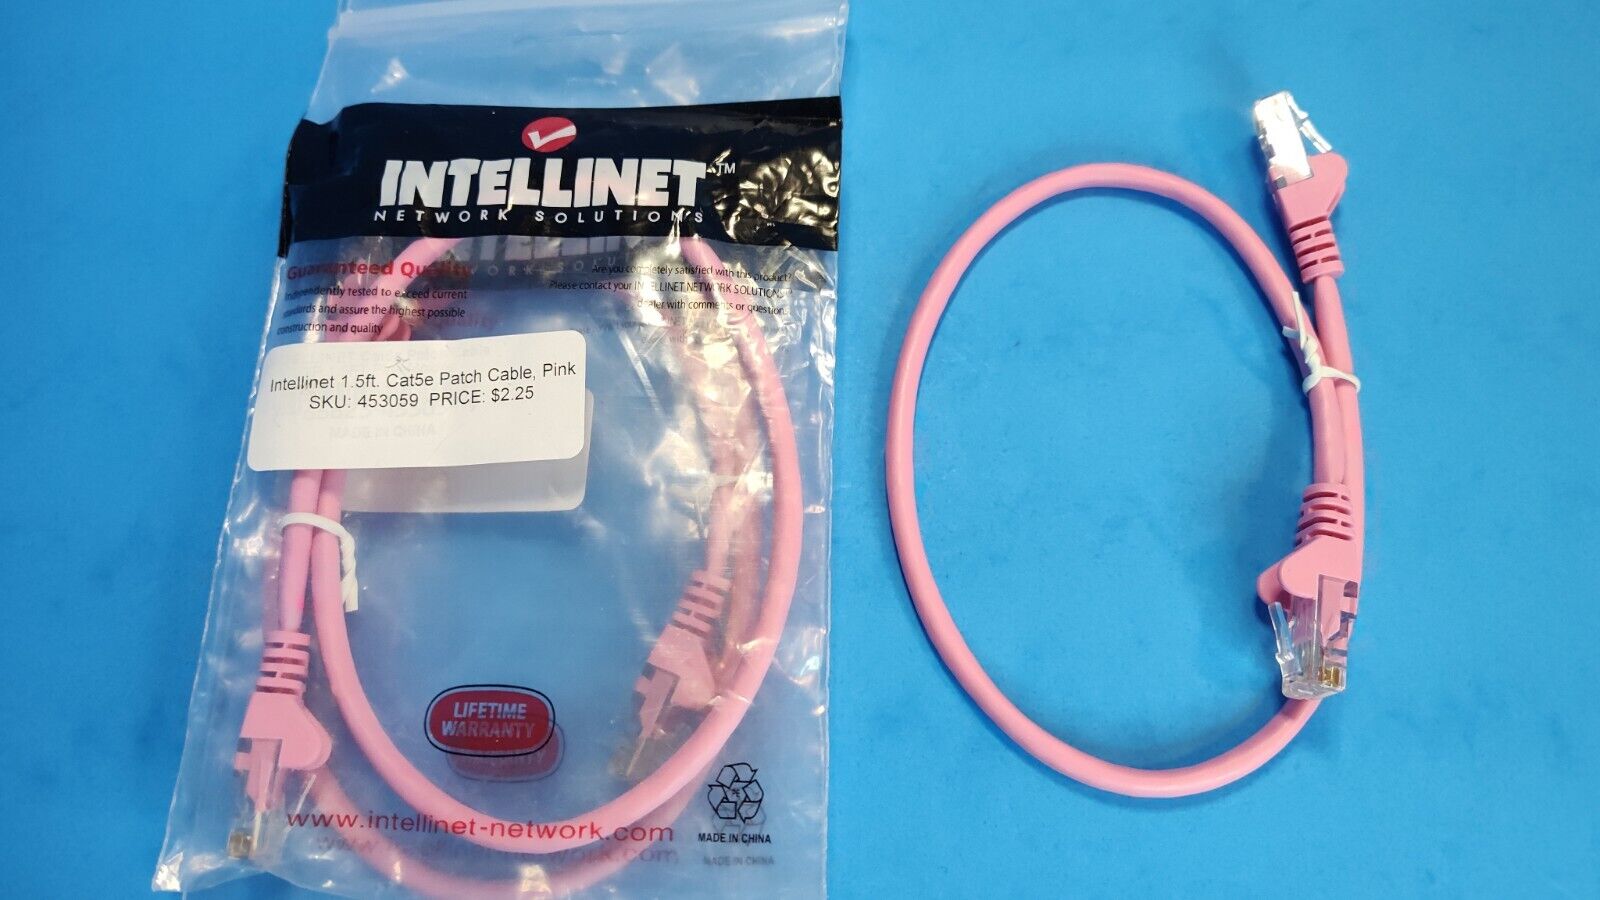 Lot of 4 x 1.5ft Intellinet Cat5e RJ45 Ethernet Network Molded Patch Cable, Pink